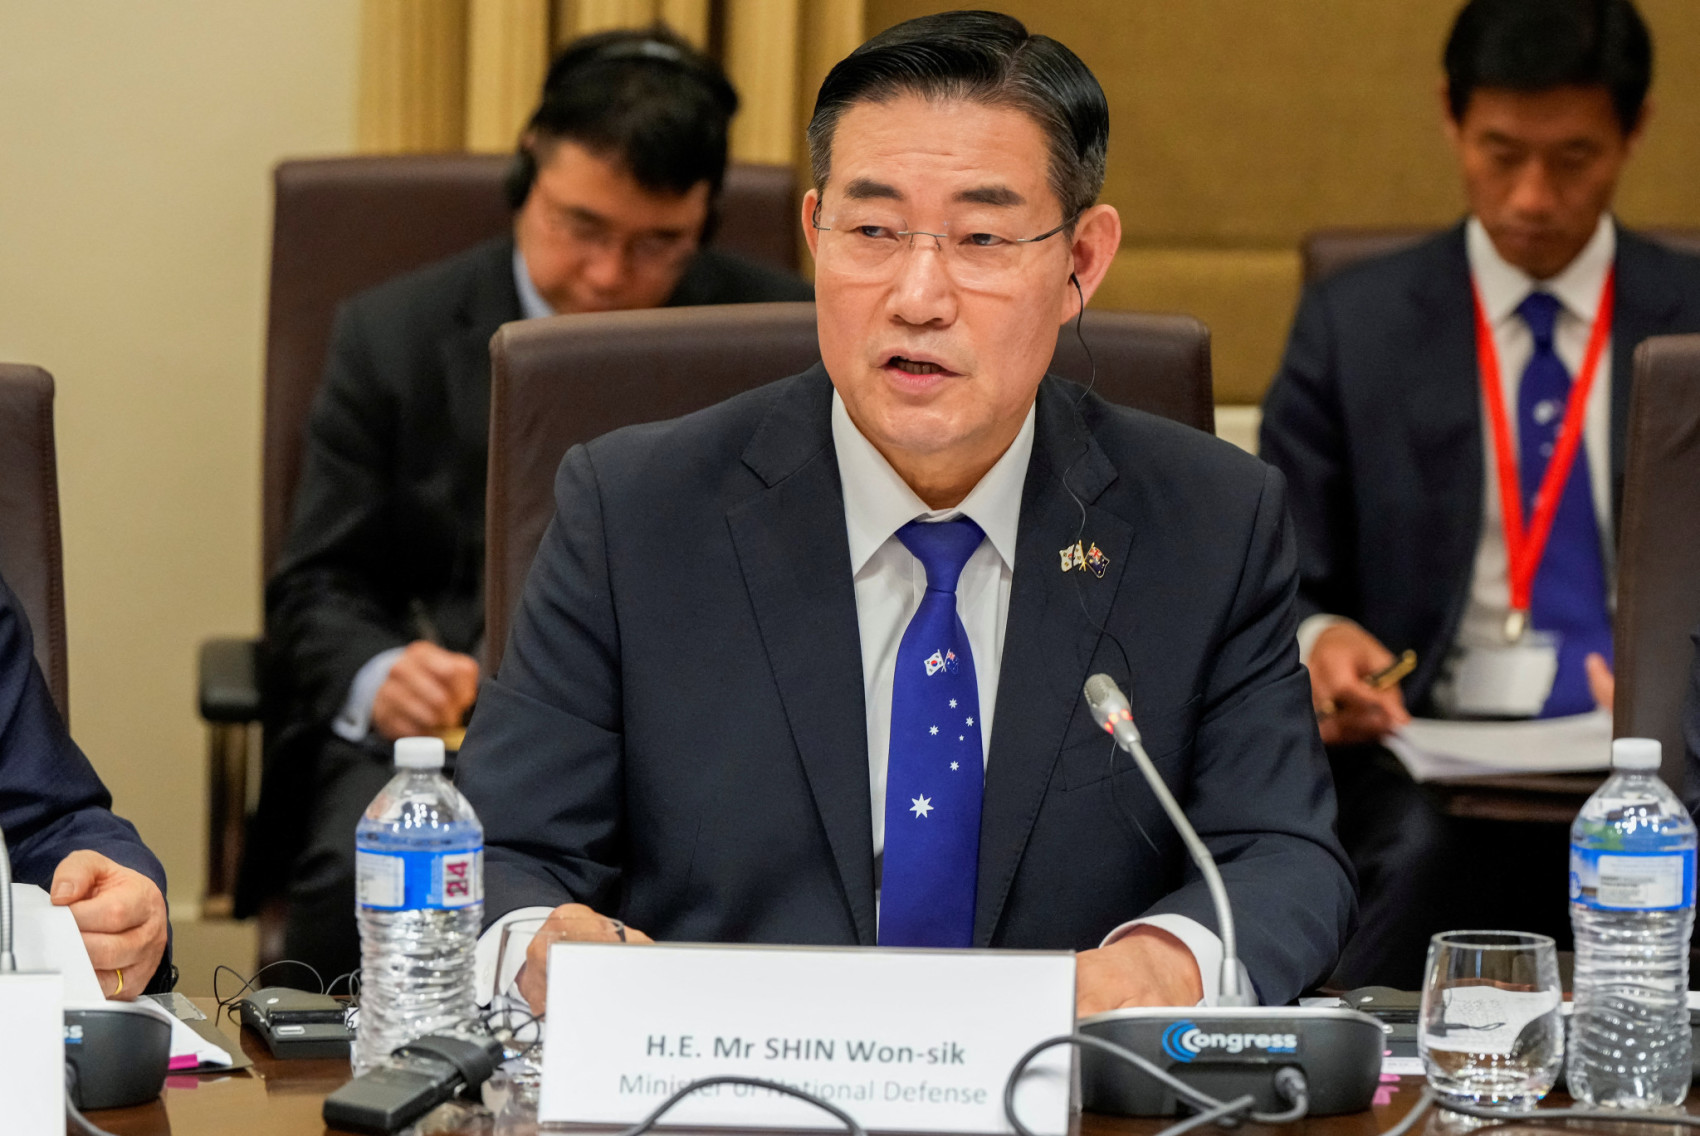 S Korea discusses joining part of AUKUS pact with U.S., UK and Australia